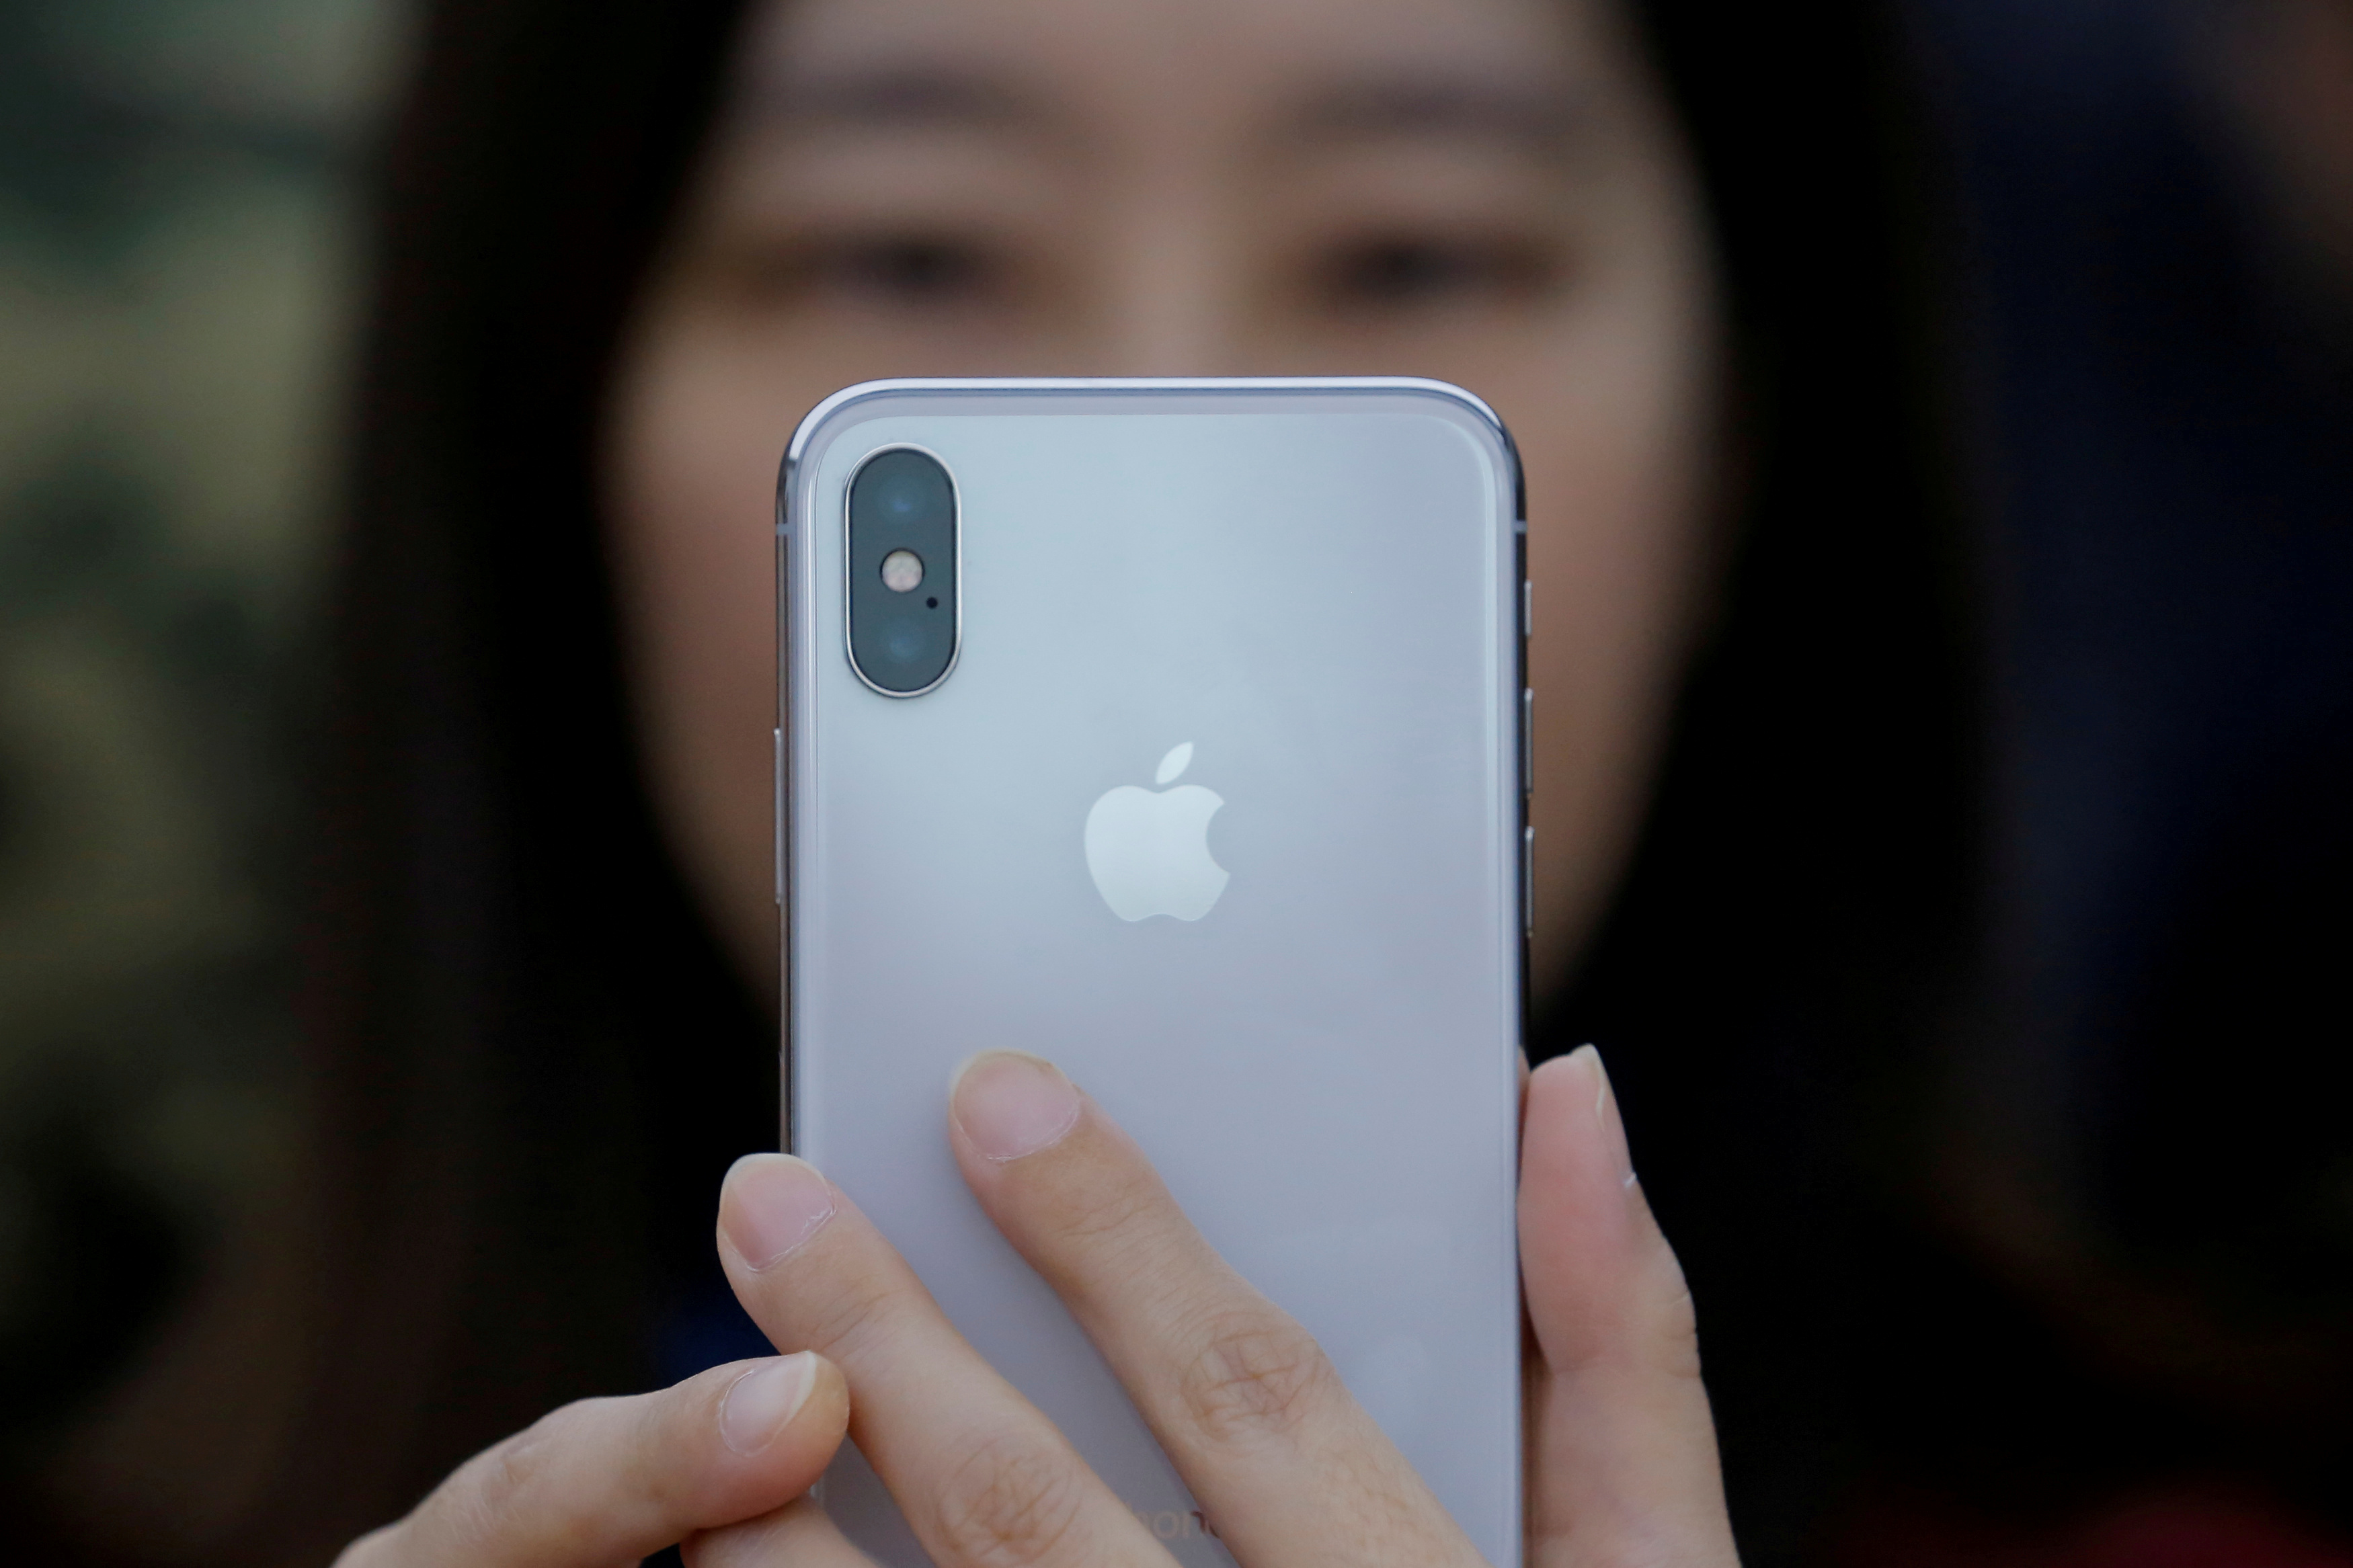 A woman uses an iPhone X during a presentation in Beijing, China on Oct. 31, 2017. (Thomas Peter&mdash;Reuters)